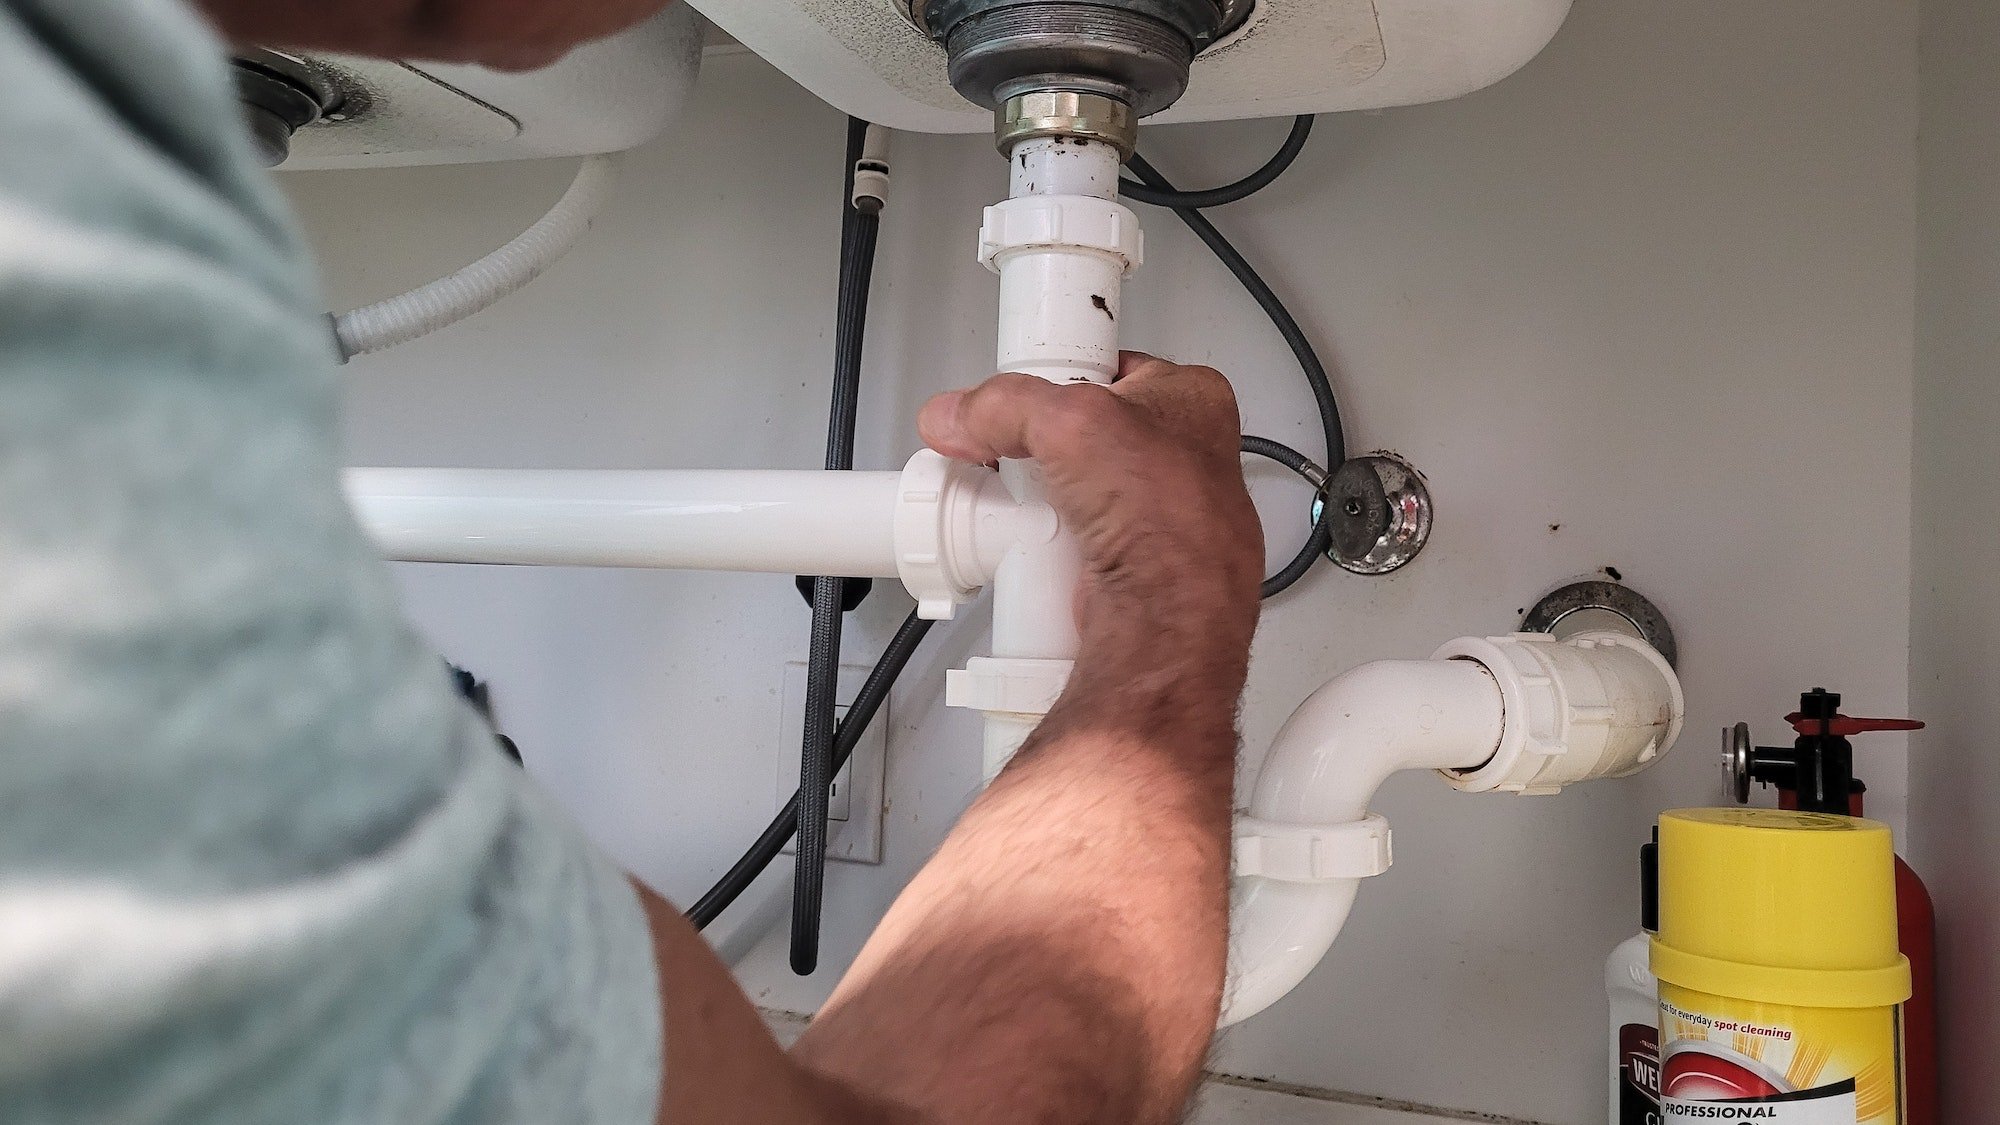 Handyman at home tightening seals on plumbing pipes to stop a leak at kitchen sink.